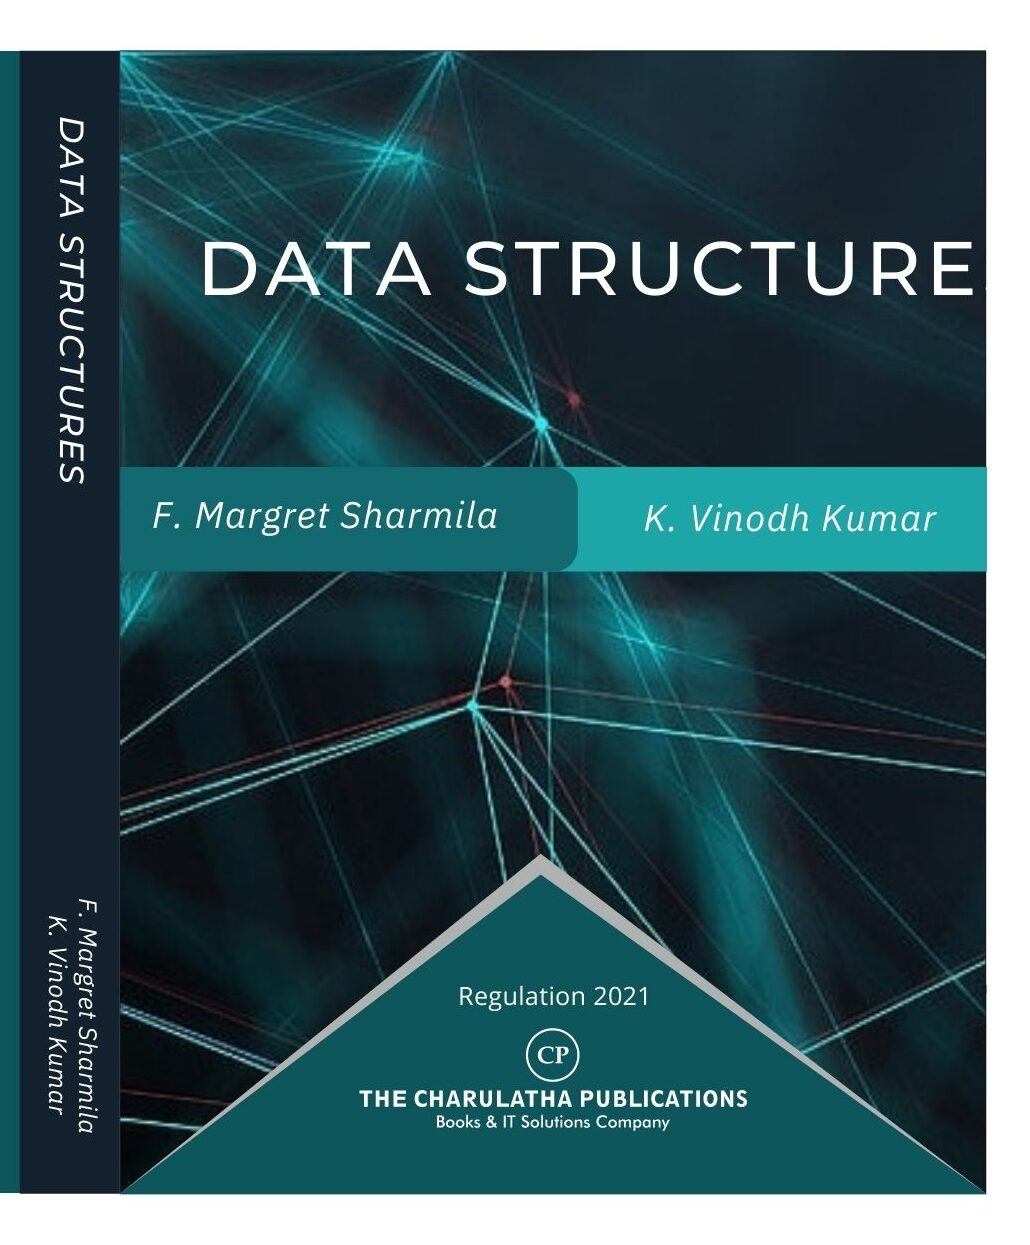 The charulatha publications Data structures